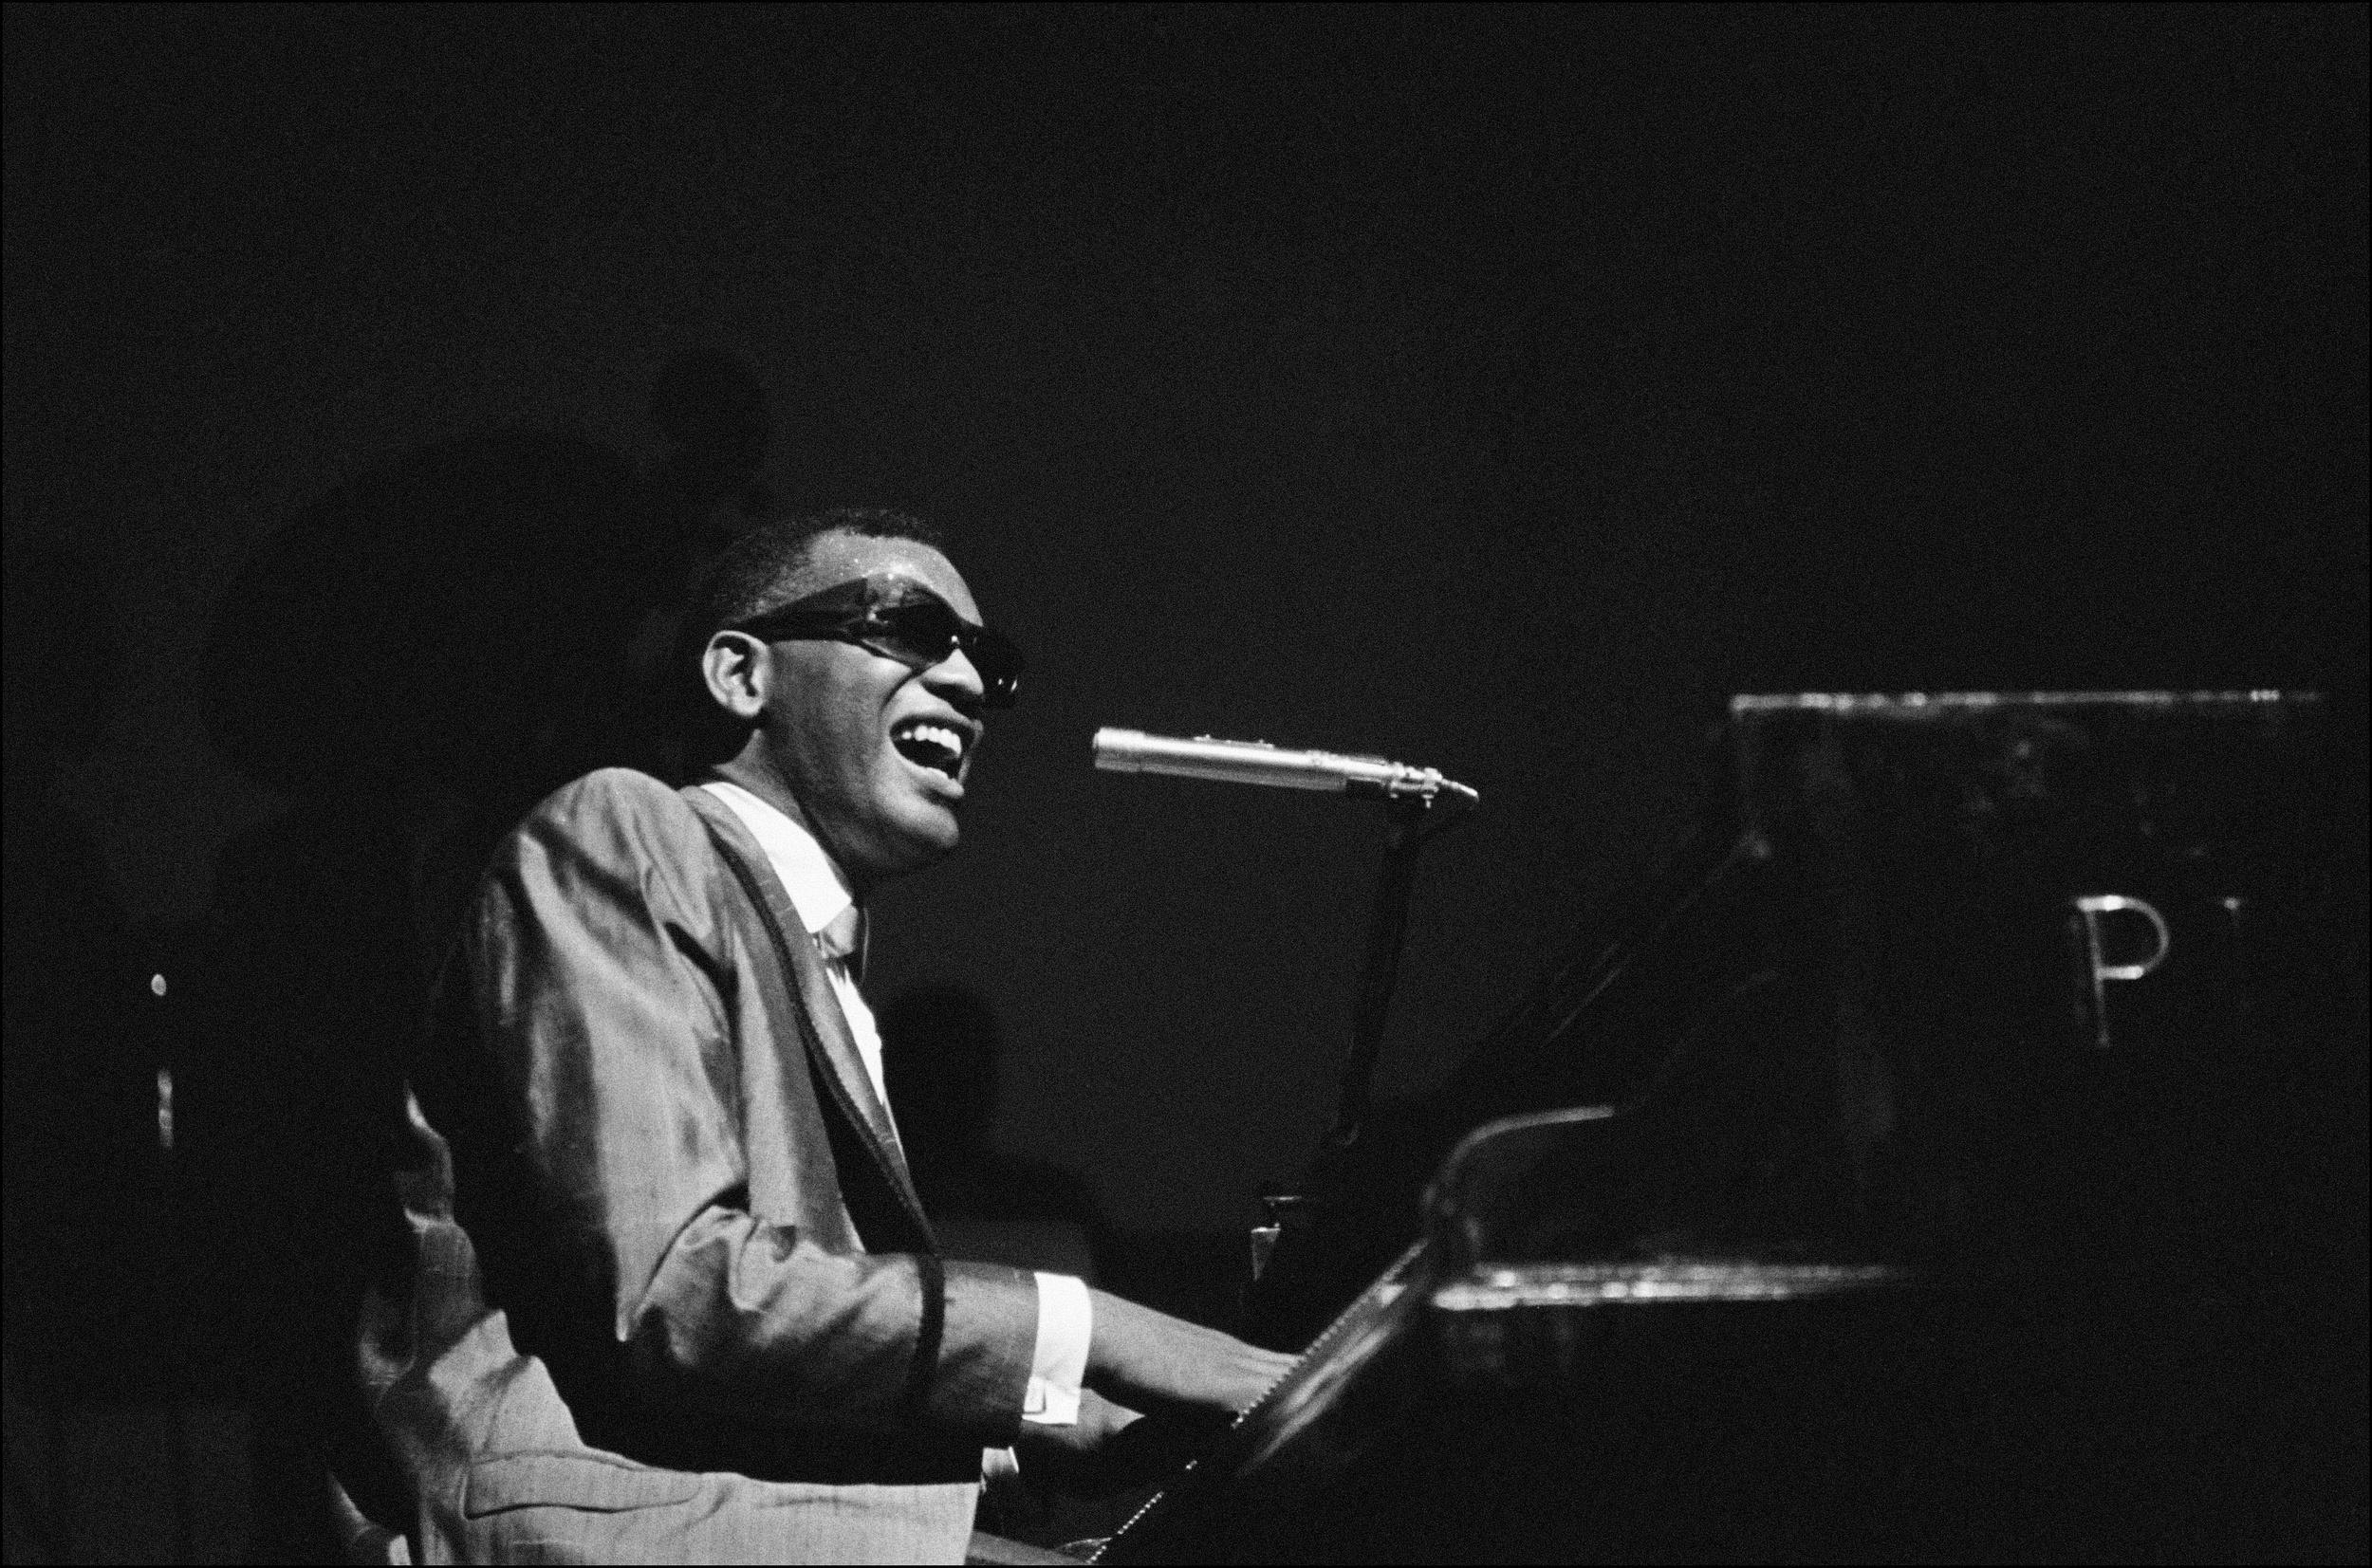 <p>Known as both “The Genius” and one of the most compelling songwriters in American music history, Ray Charles’s 1962 album Modern Sounds In Country and Western Music is a defining moment in the genre. </p><p><a href='https://www.msn.com/en-us/community/channel/vid-cj9pqbr0vn9in2b6ddcd8sfgpfq6x6utp44fssrv6mc2gtybw0us'>Follow us on MSN to see more of our exclusive entertainment content.</a></p>